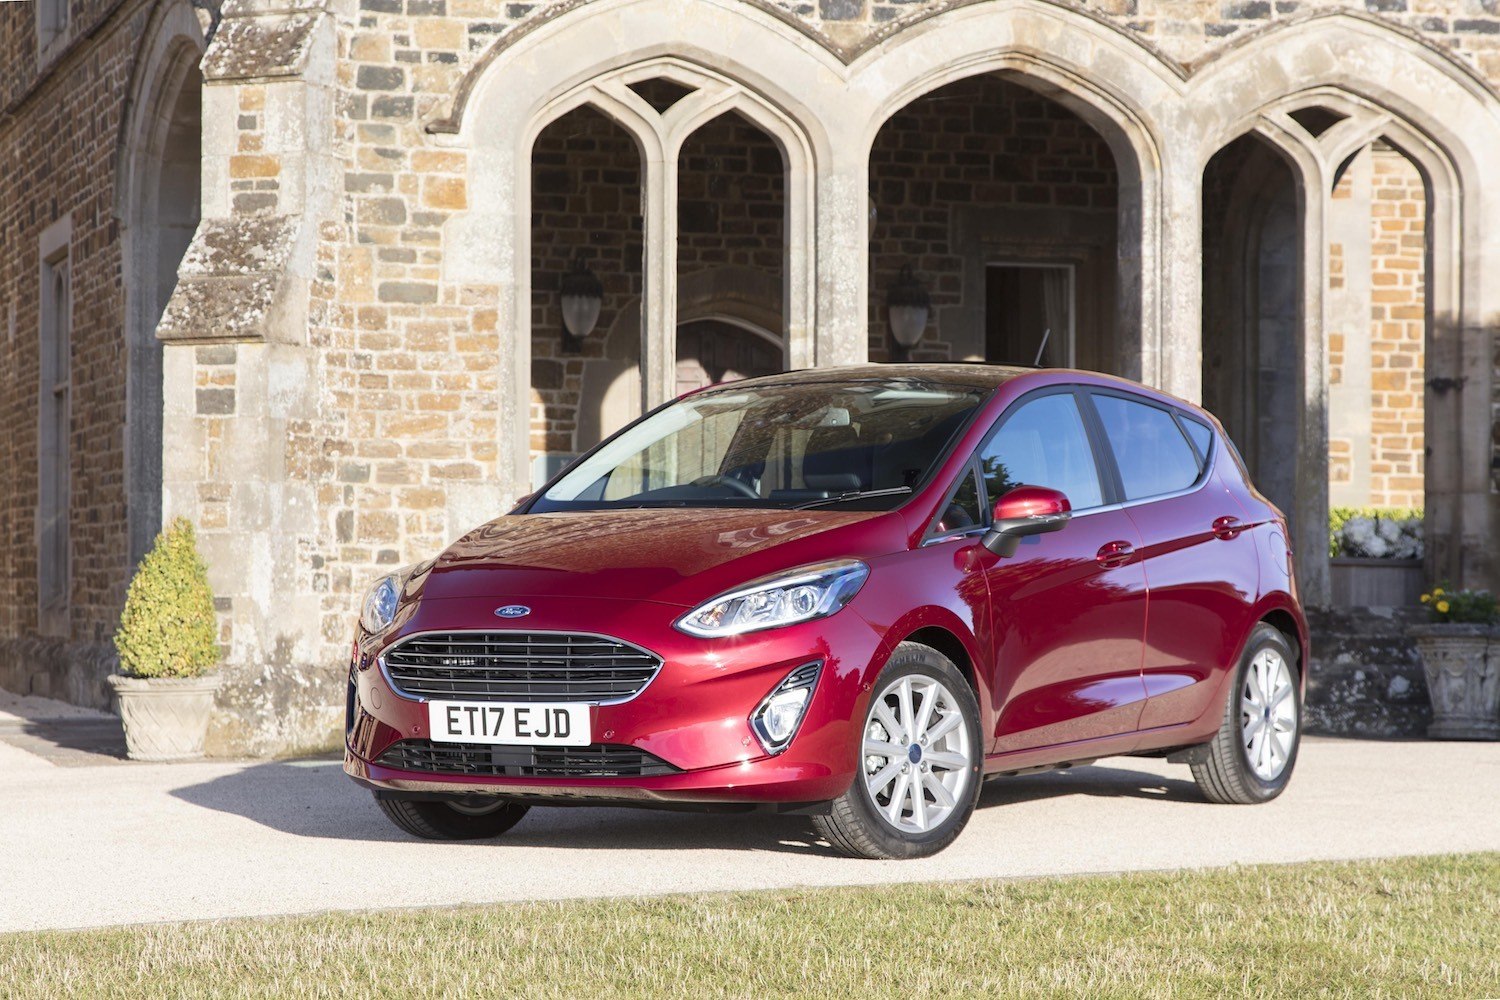 Tom Scanlan reviews the All New Ford Fiesta for Drive 18